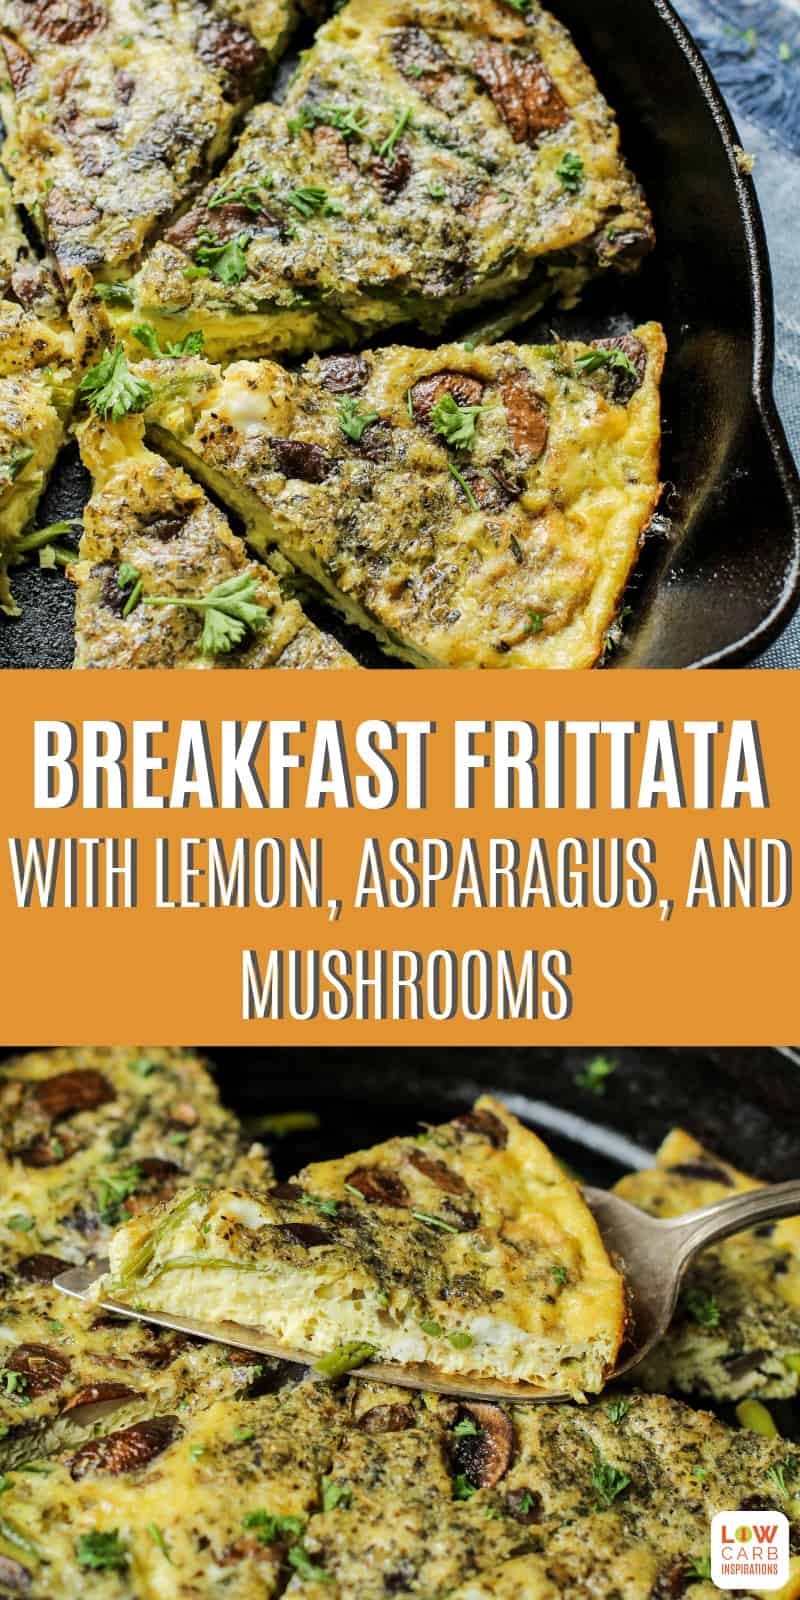 This easy breakfast frittata is packed with so many delicious flavors. The lemon, asparagus, and mushrooms take this ordinary breakfast idea over the top!